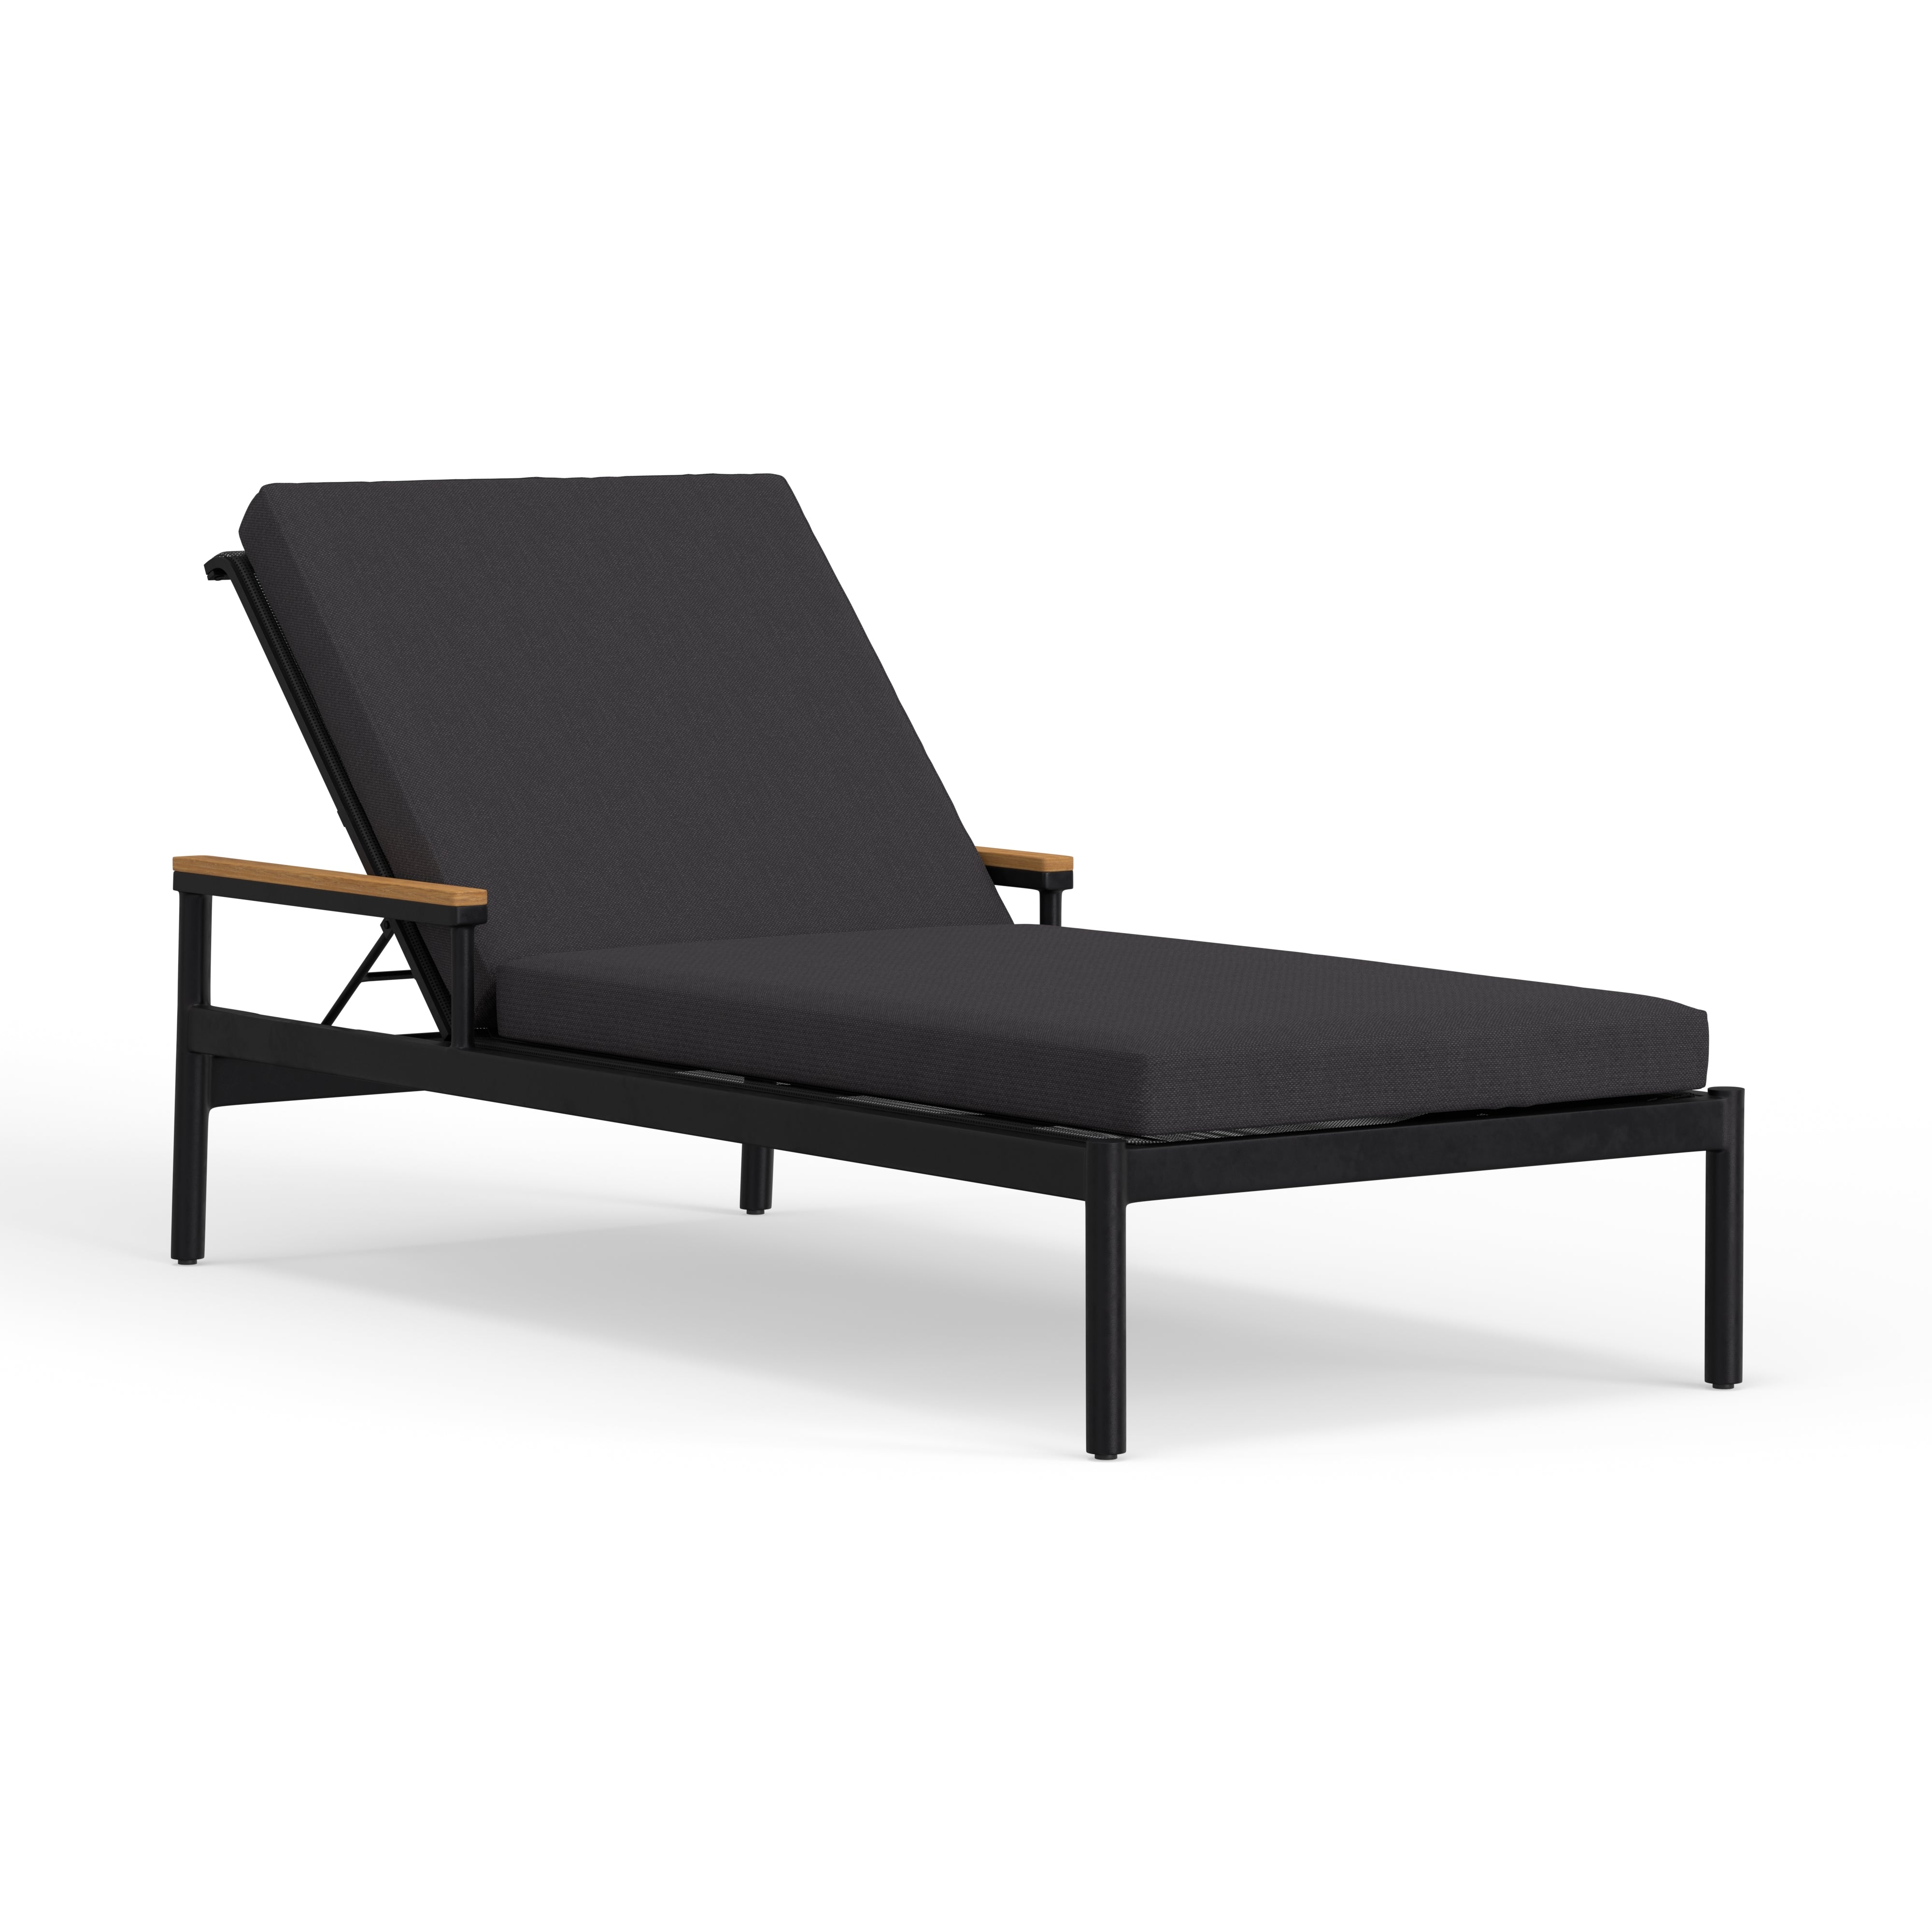 Most Comfortable Outdoor Lounge Chair